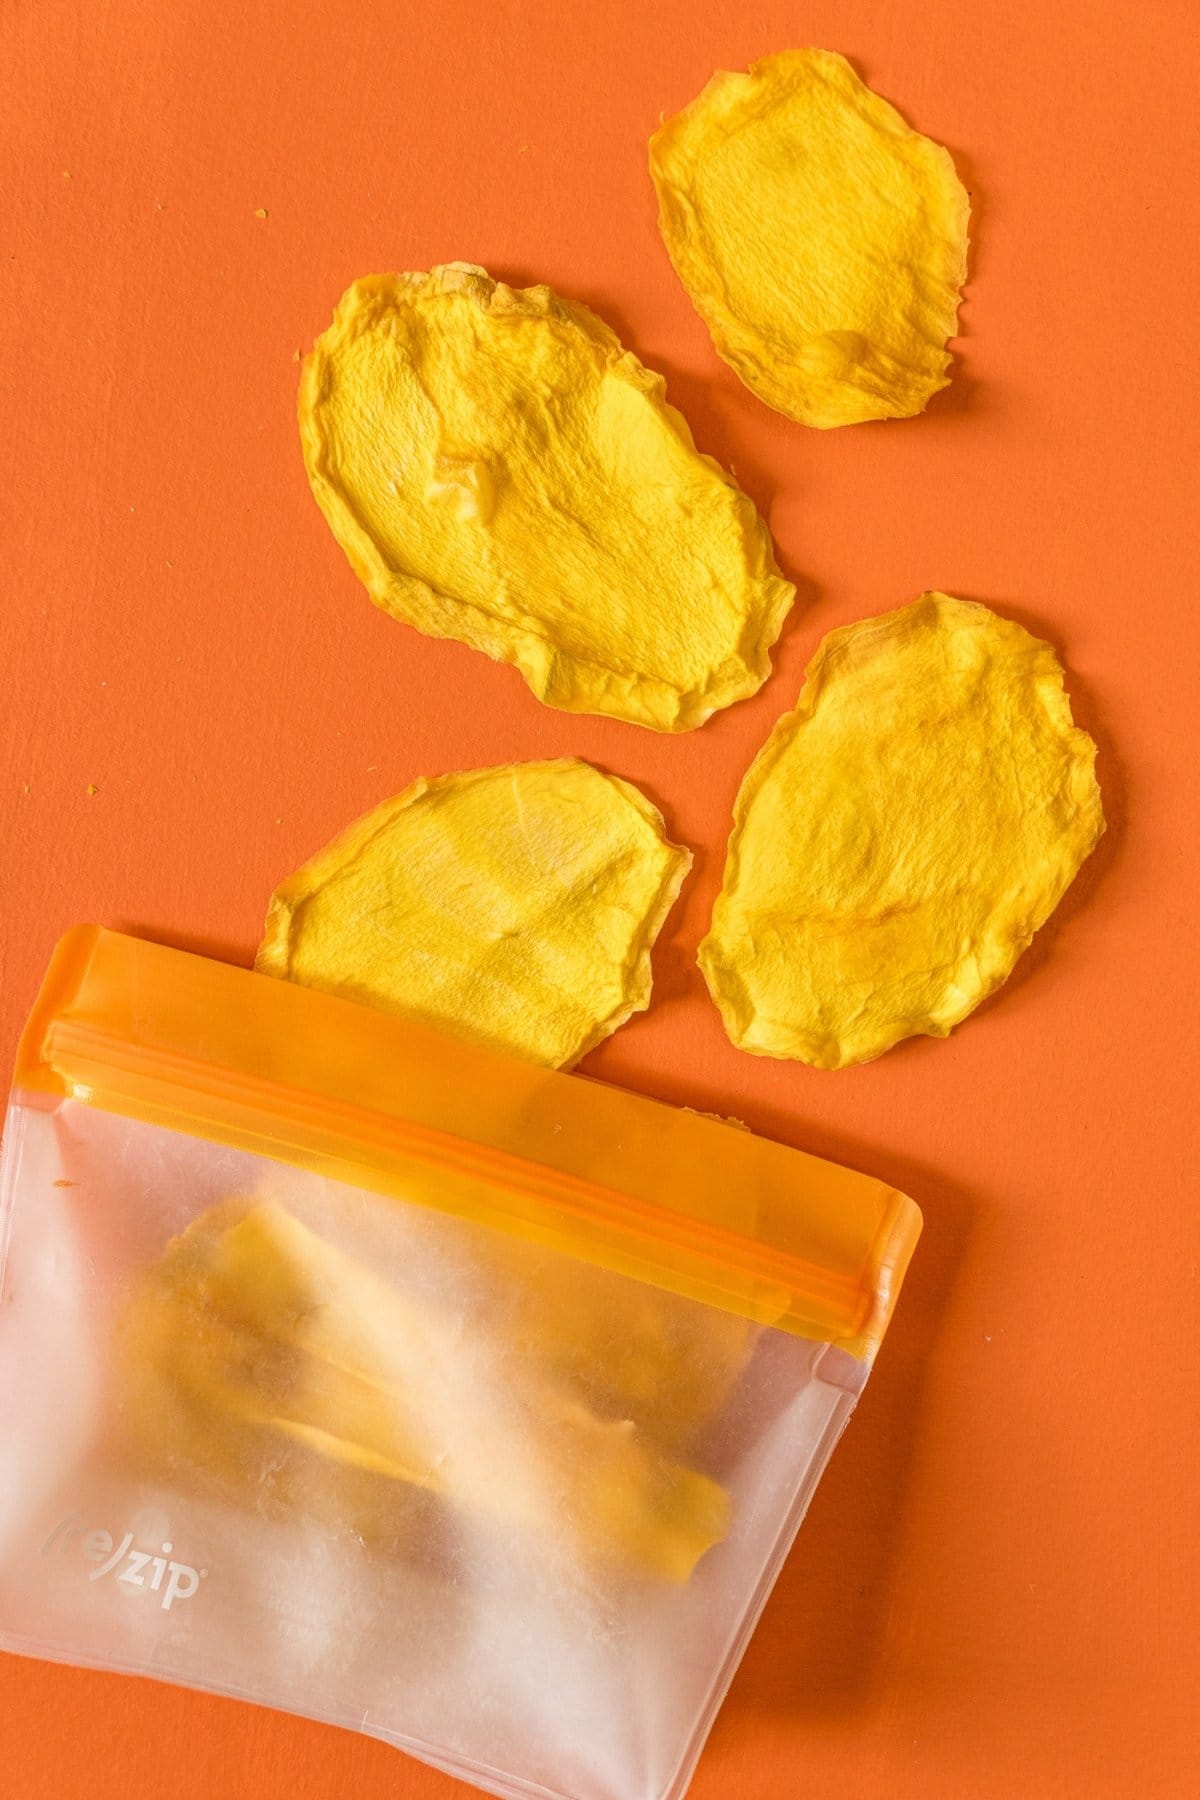 Dried mango in a reusable bag